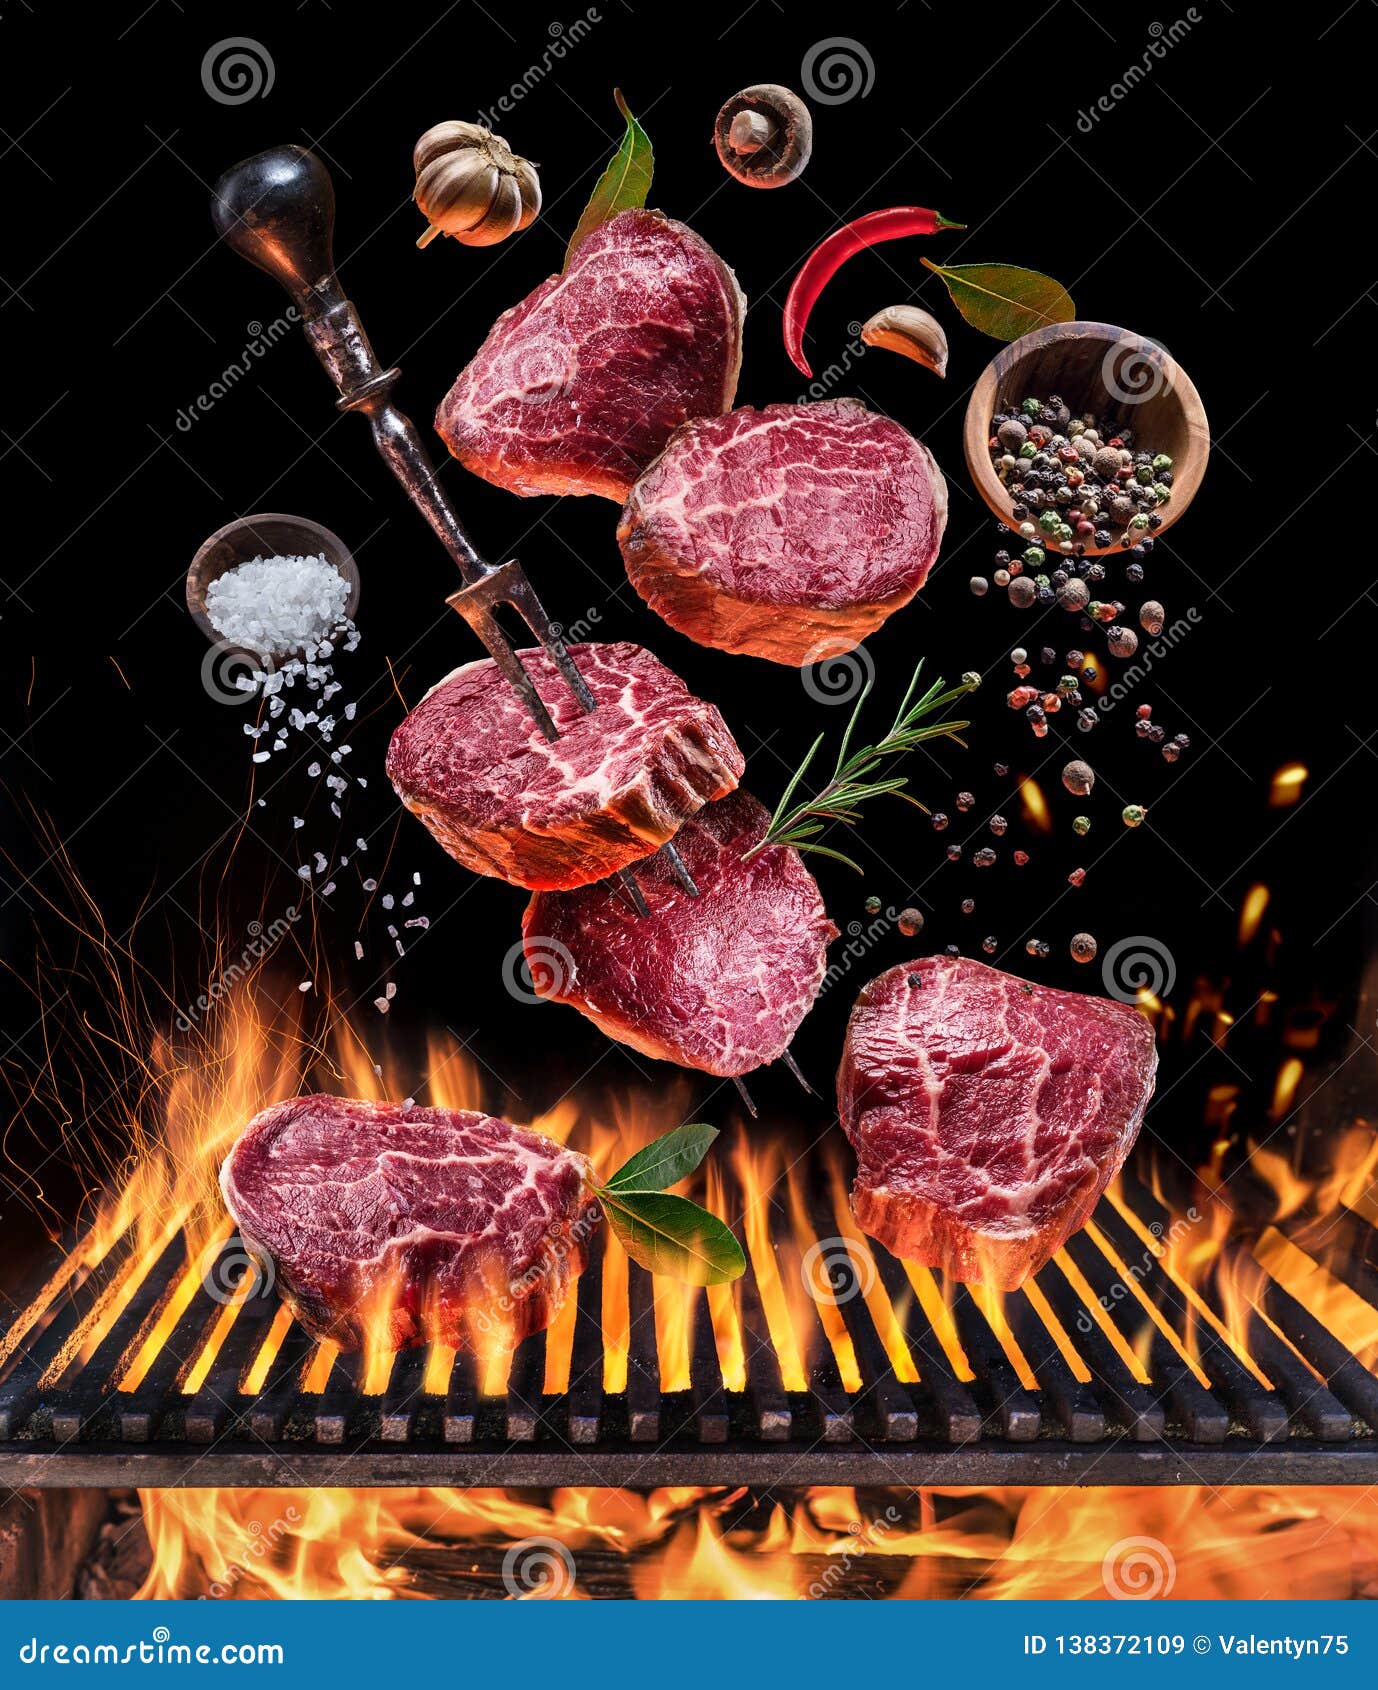 steak cooking. conceptual picture. steak with spices and cutlery under burning grill grate